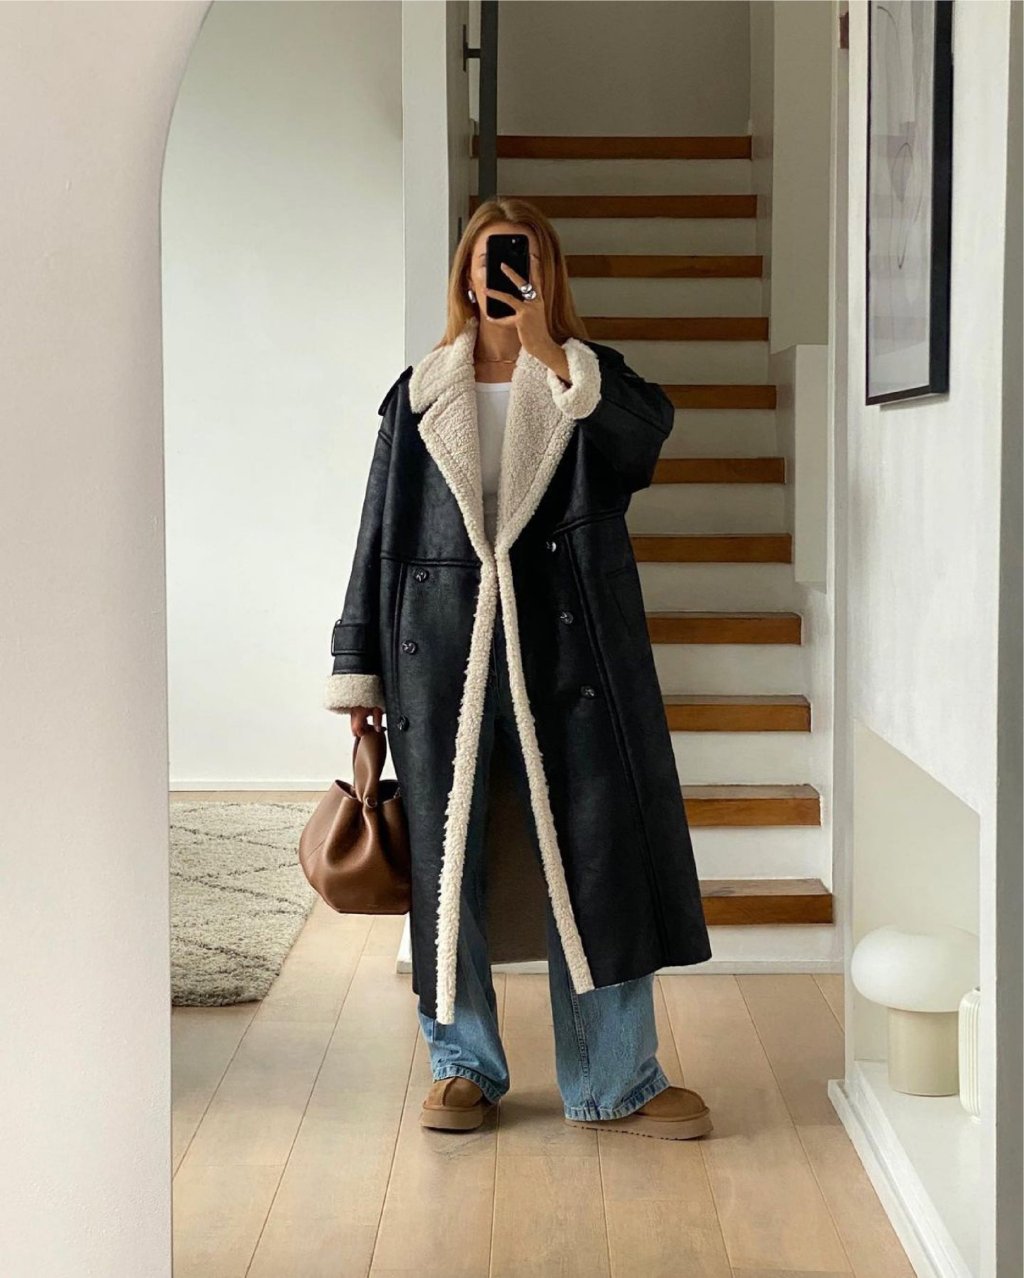 7 Coat Jeans Boots Outfit Ideas We're Loving This Winter 2023